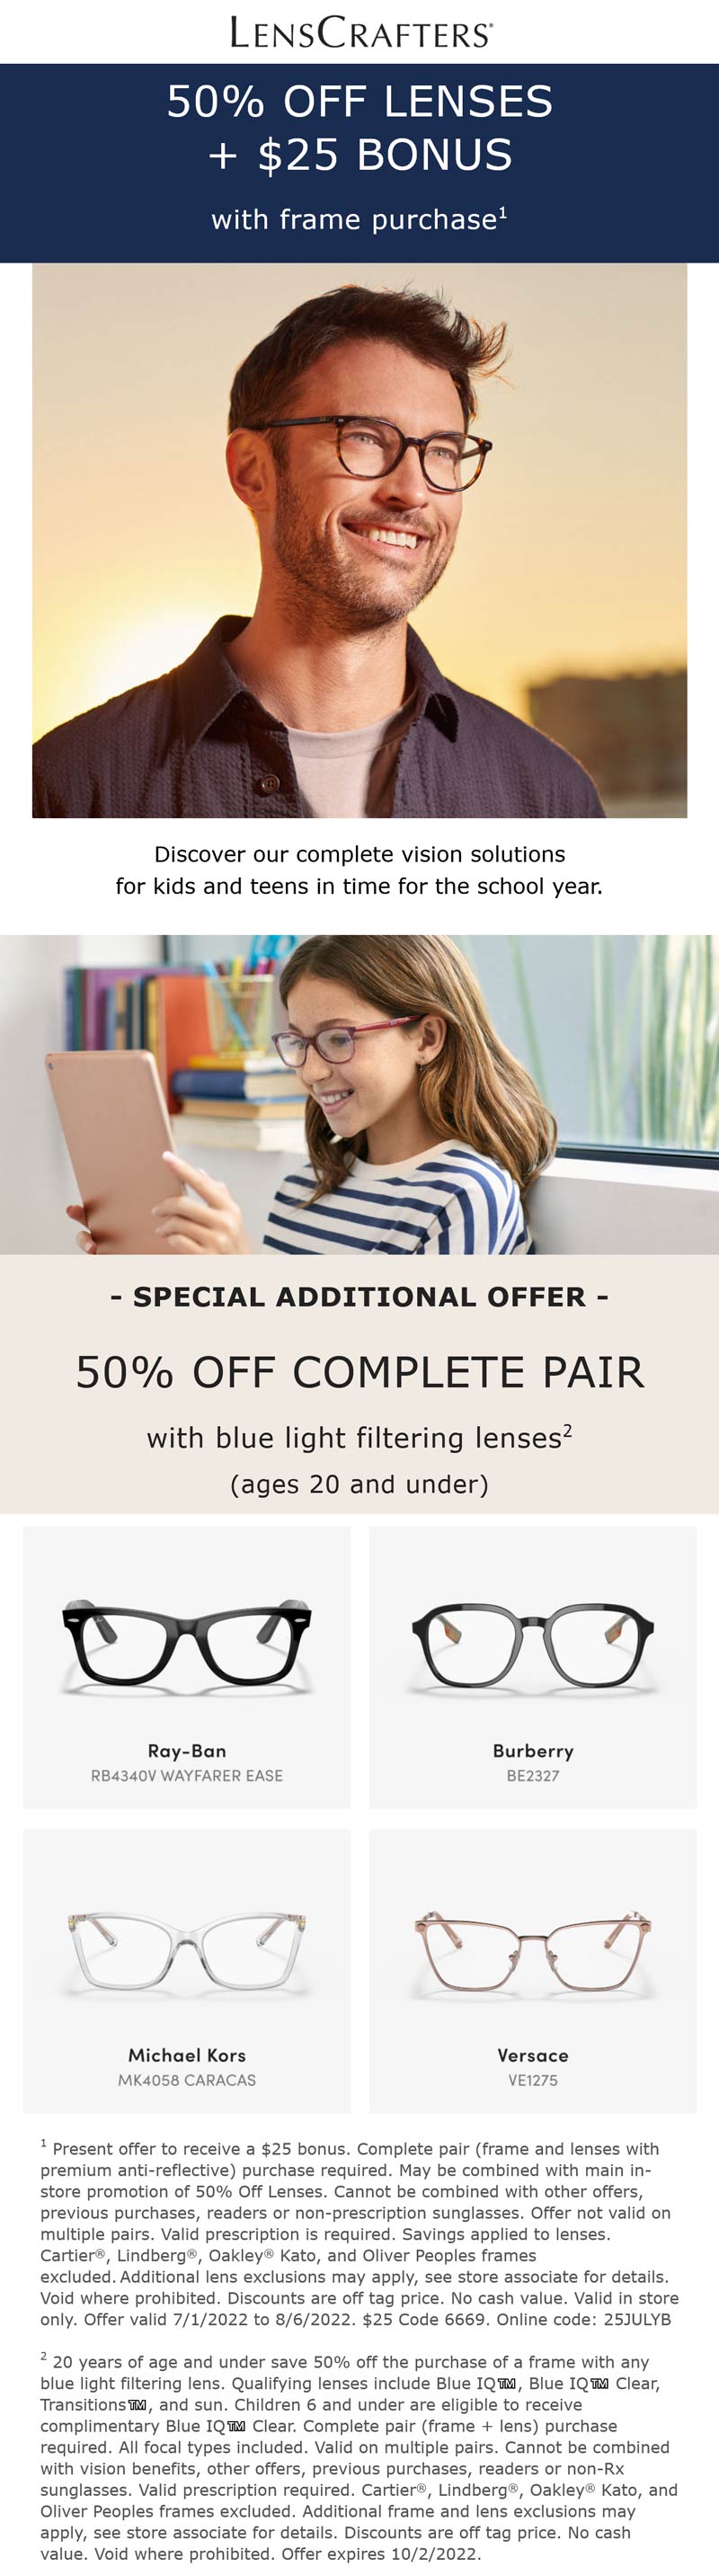 Lenscrafters stores Coupon  50% off lenses + another $25 with your frame & more at Lenscrafters, or online via promo code 25JULYB #lenscrafters 